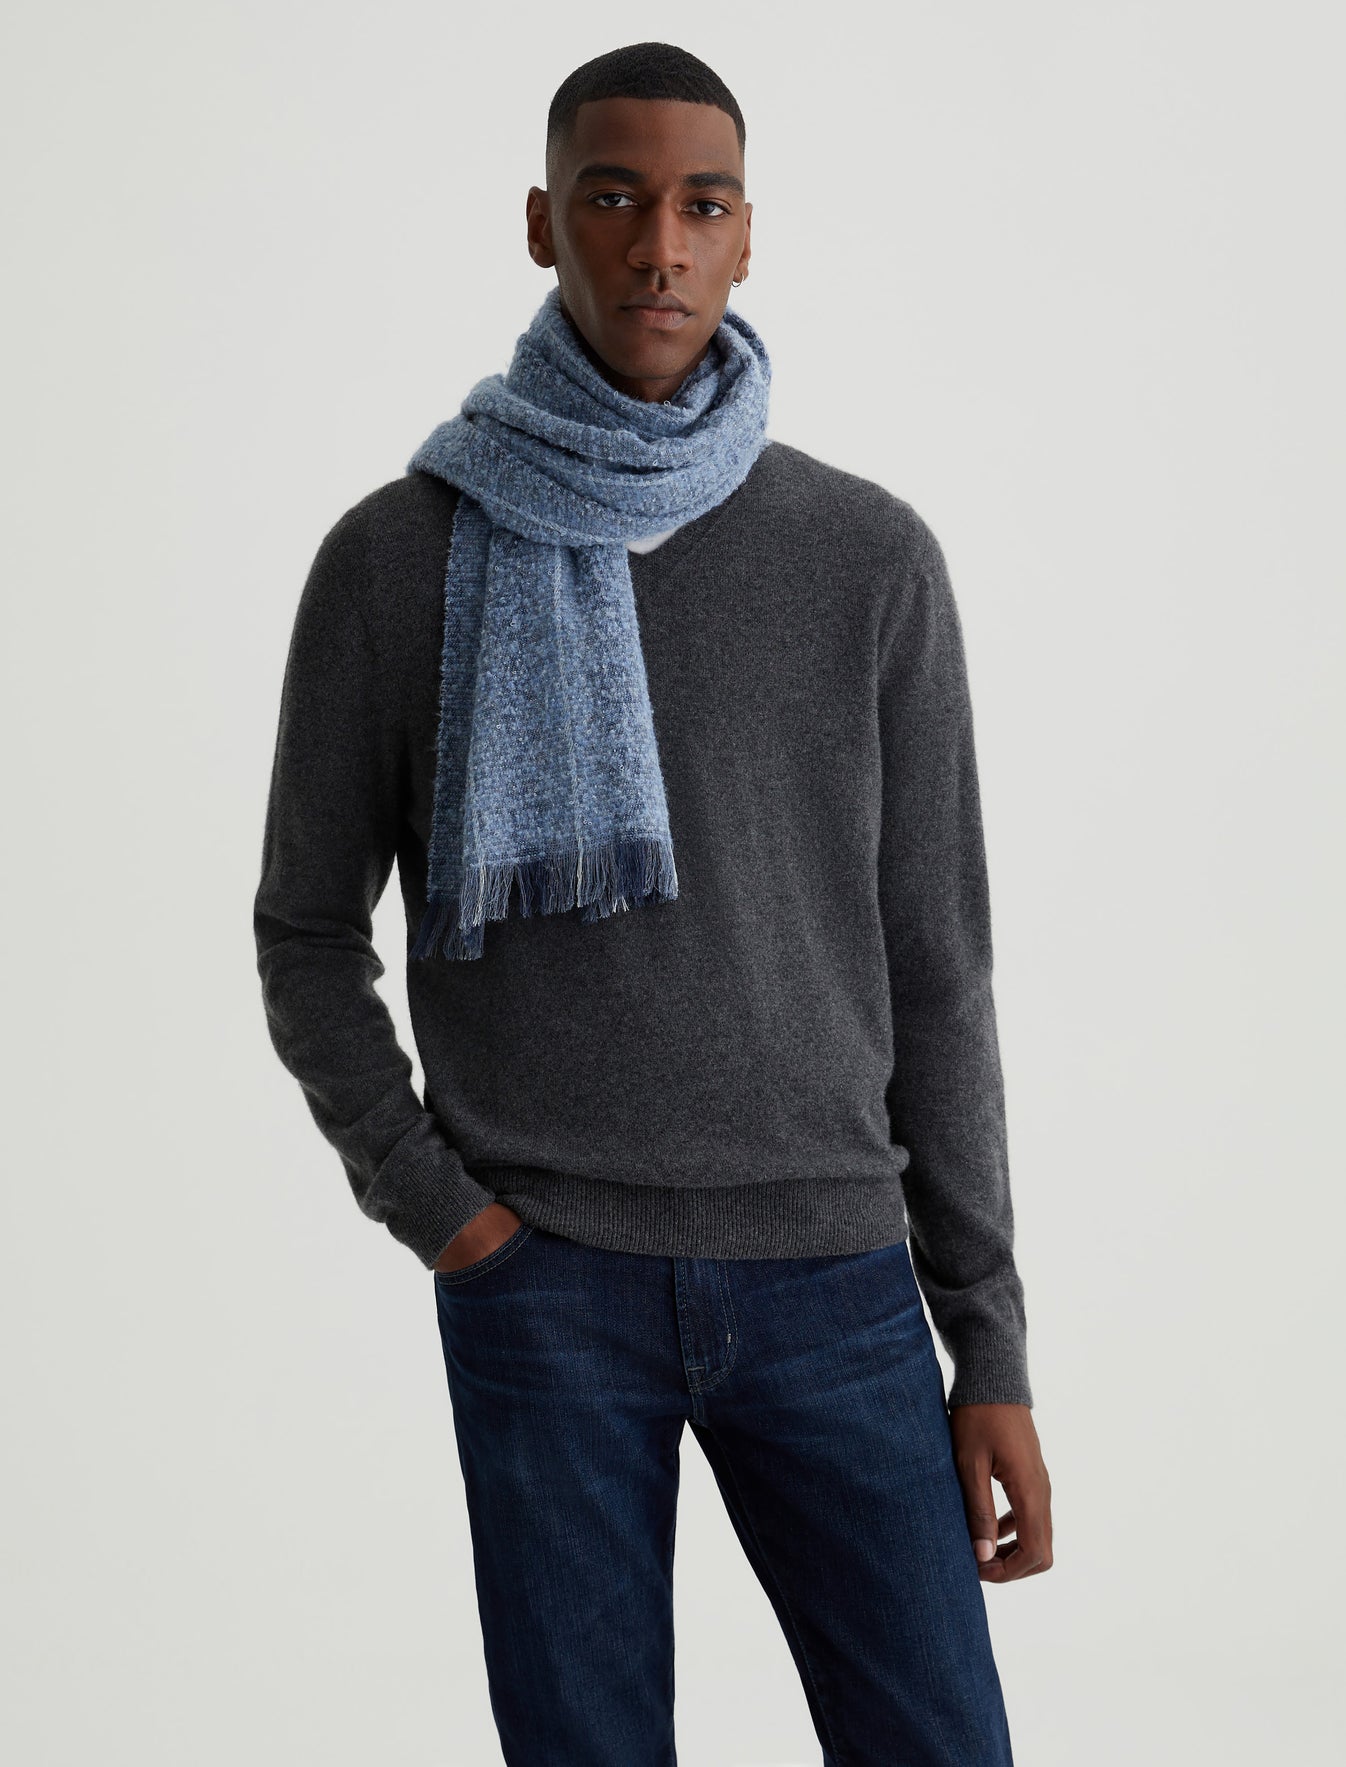 Accessory Arden Scarf Indigo Wool at Official Store AG Stripe Jeans